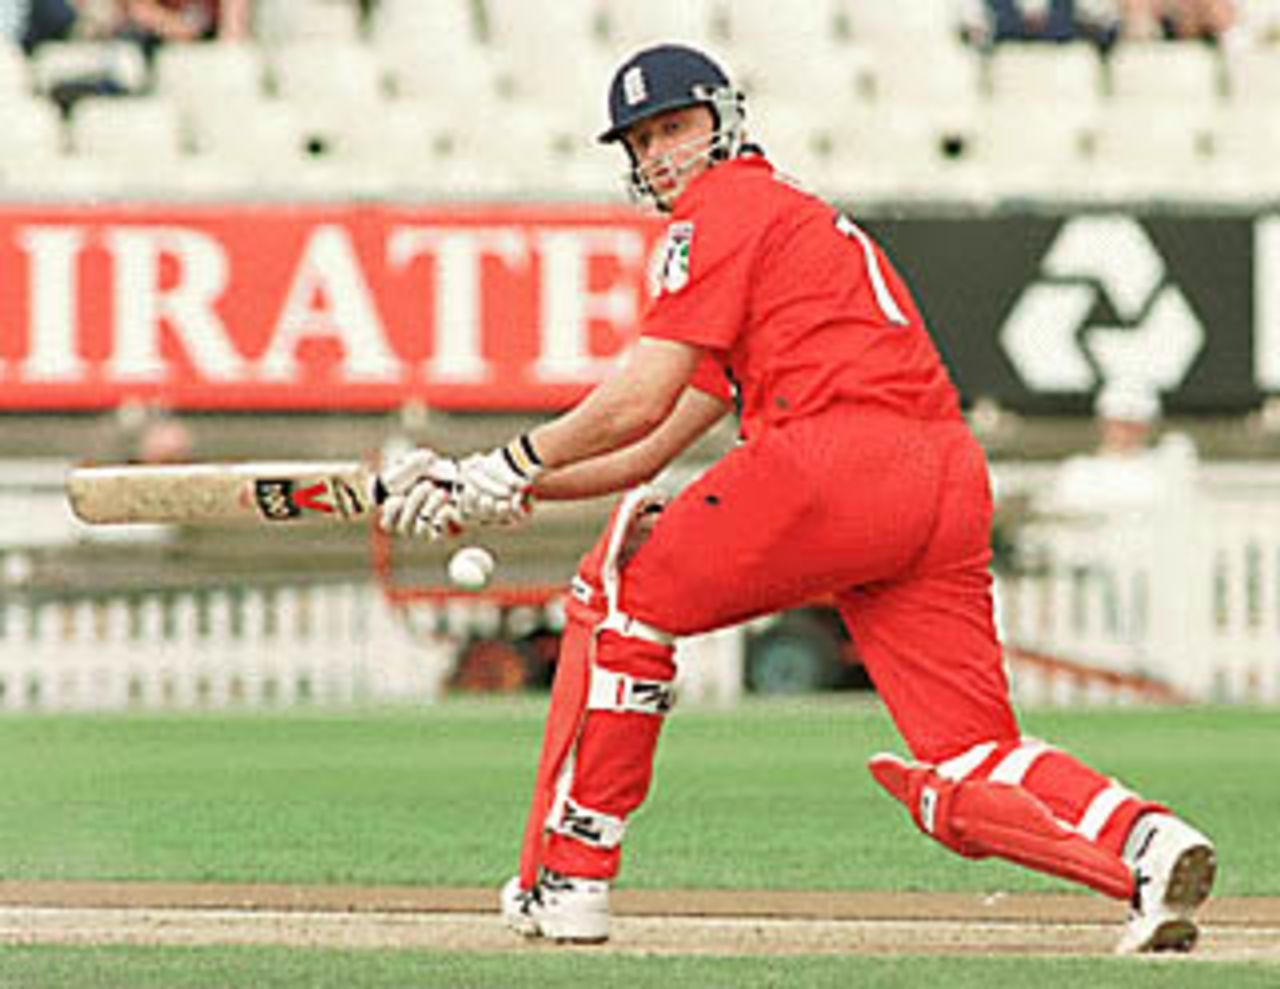 Andrew Flintoff during his innings of 45, Warwickshire v Lancashire, National League 1st Division, 13 June 1999